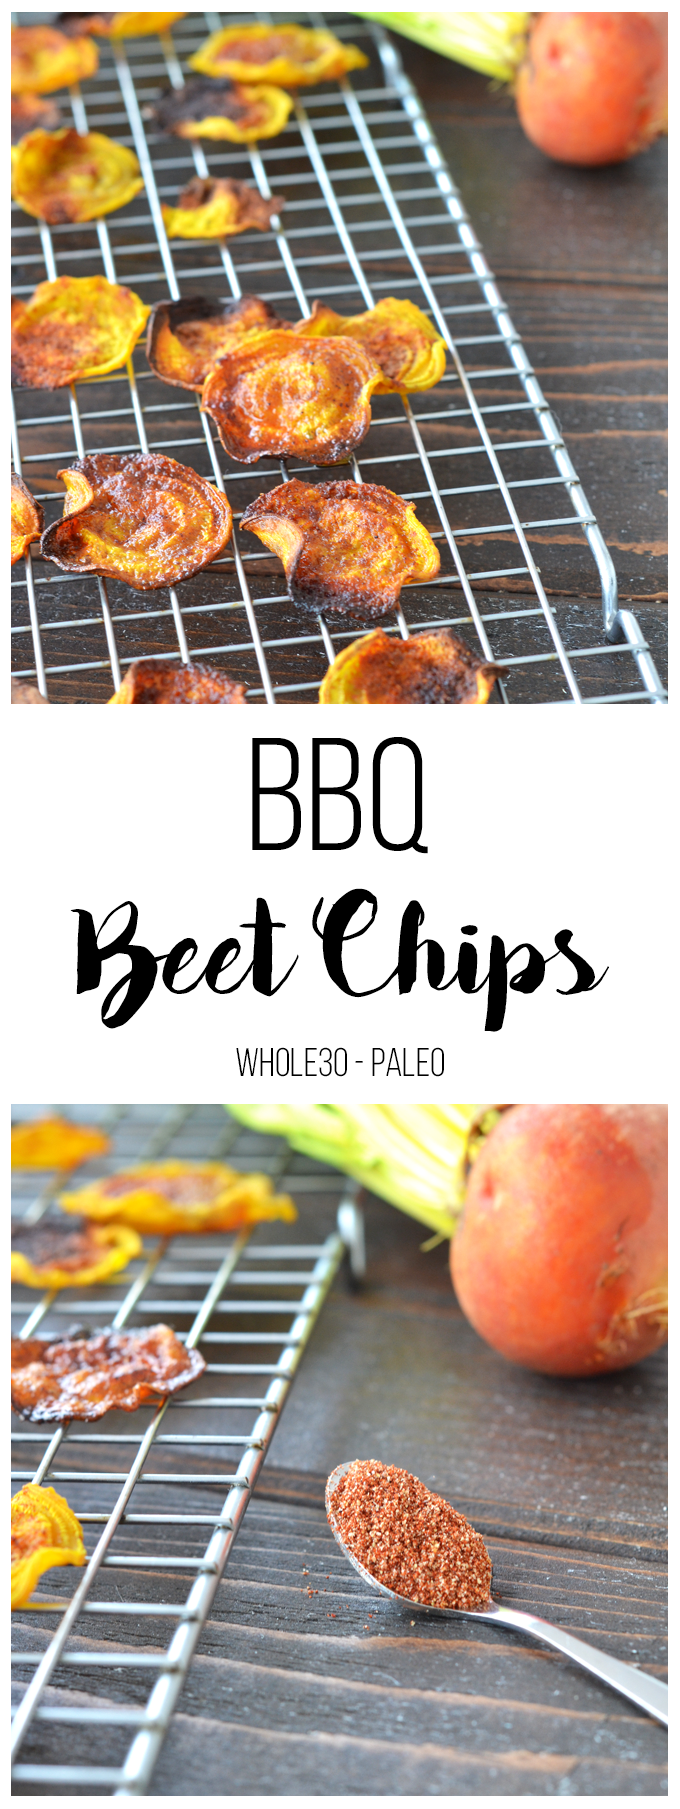 These BBQ Beets Chips are super easy to throw together for a healthy snack option! Whole30 and paleo approved with simple ingredients.